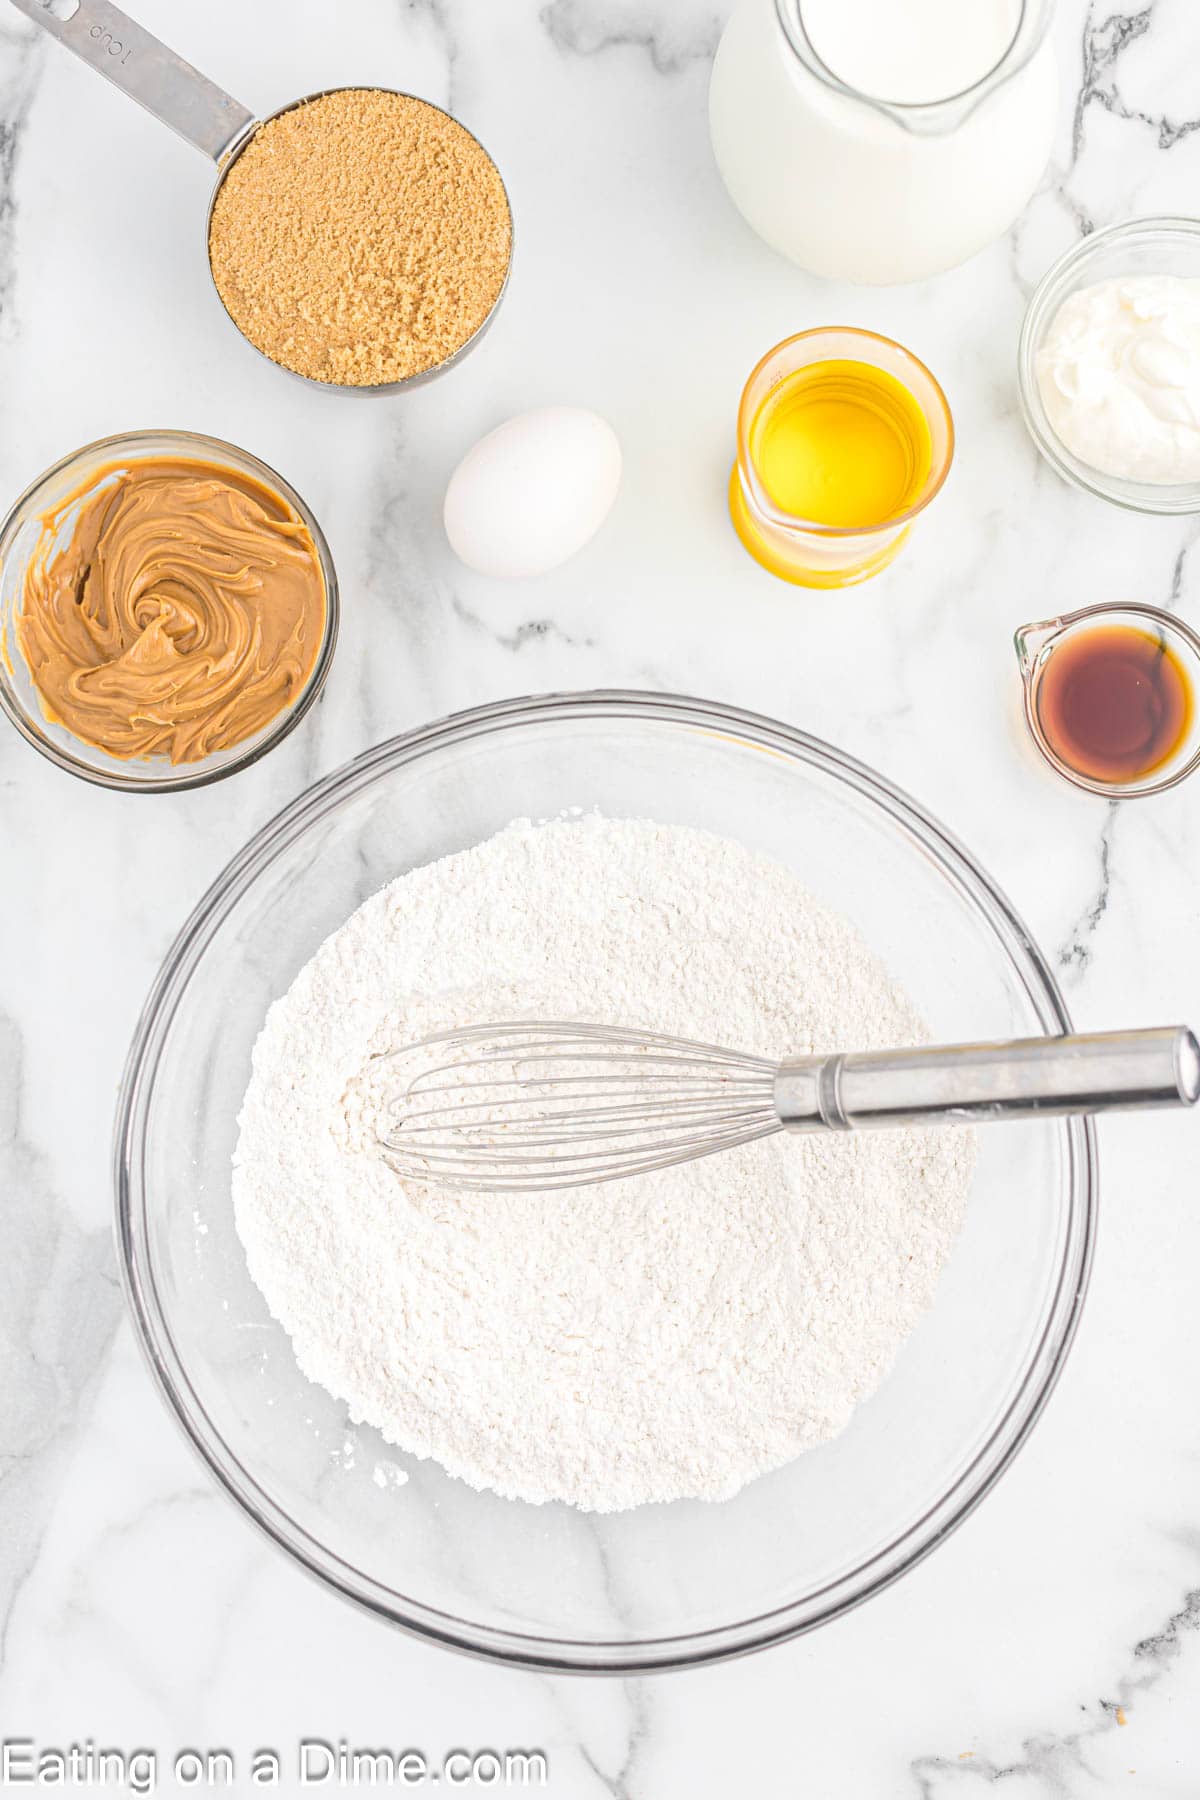 Combine the dry ingredients with a whisk